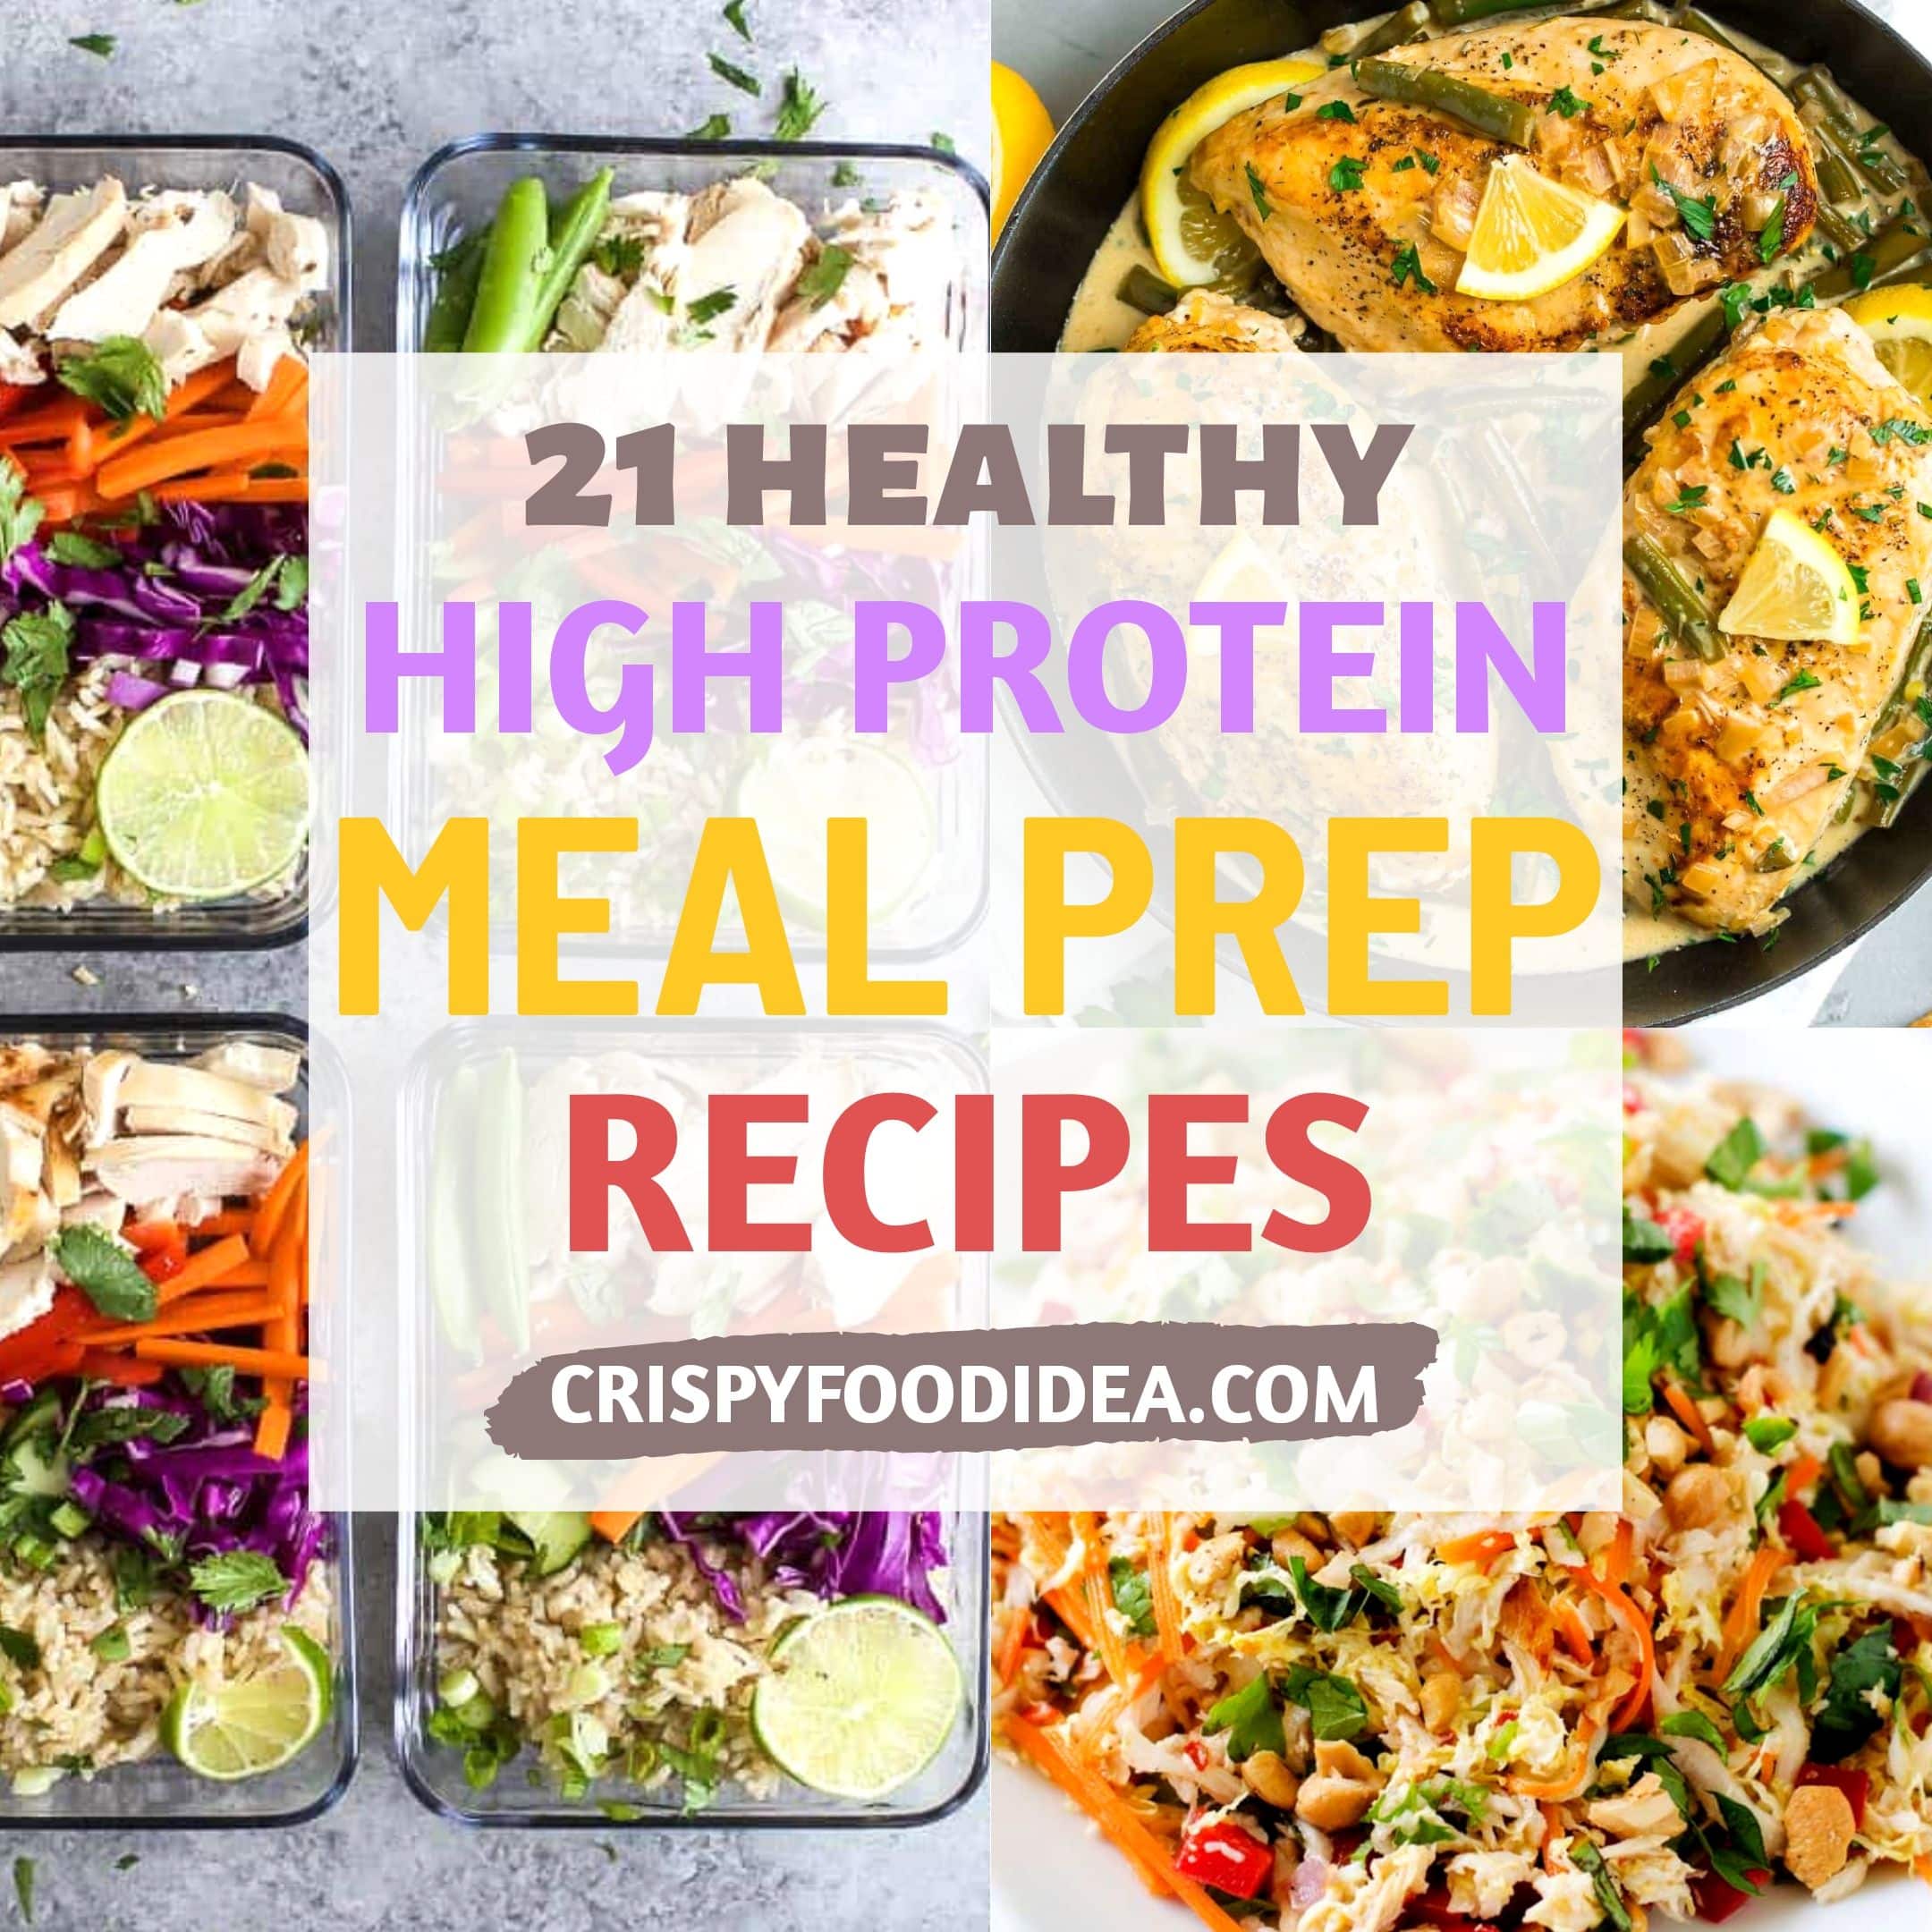 Easy High Protein Meal Prep Recipes That